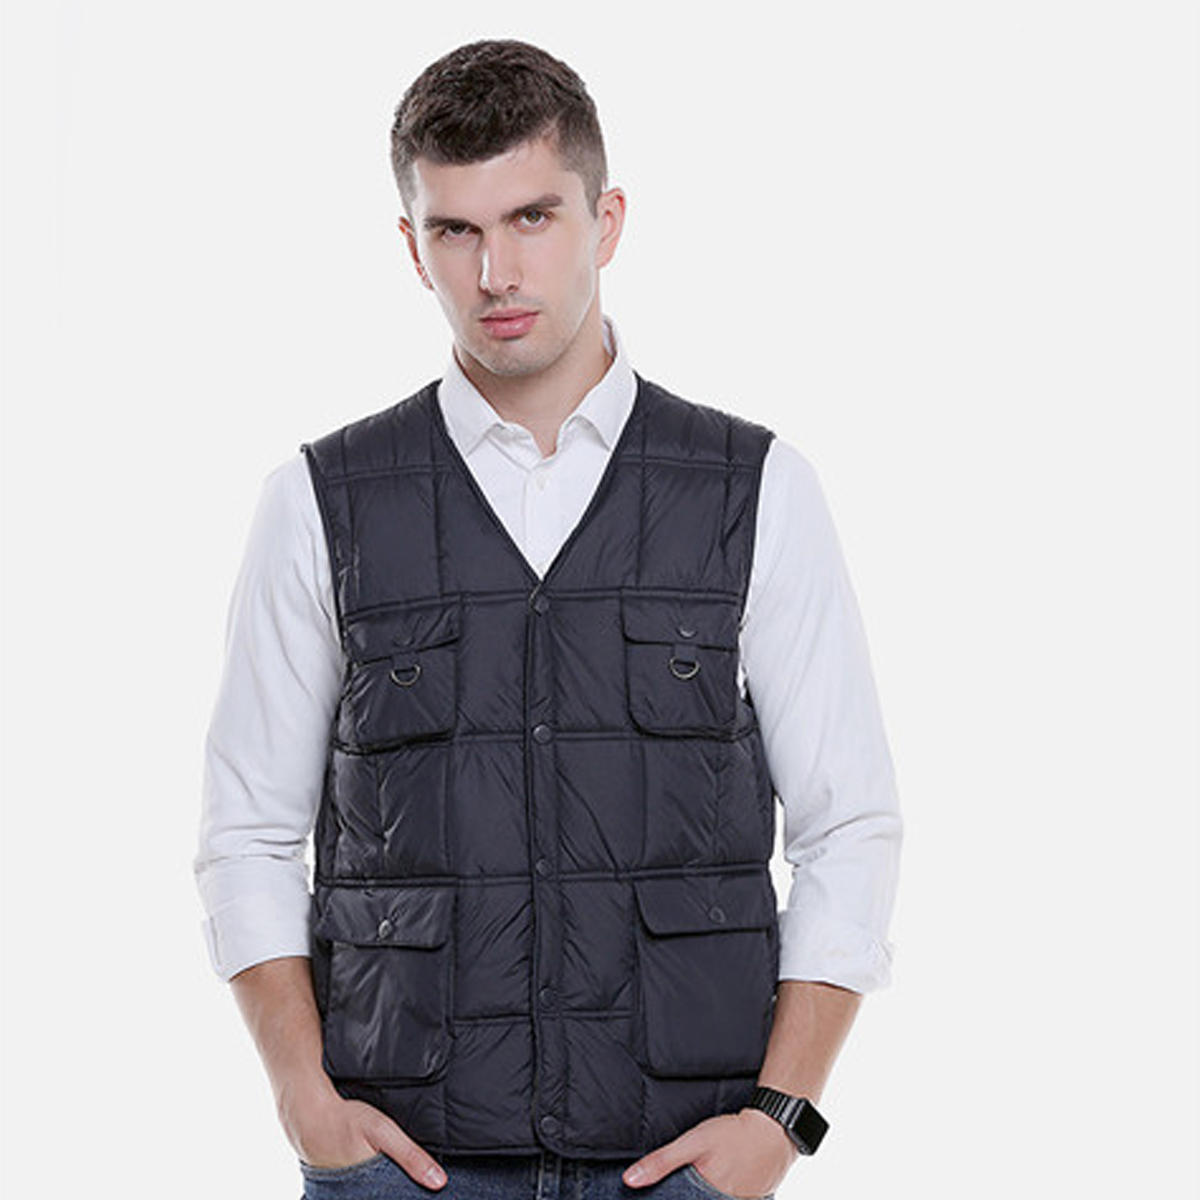 Image of Adjustable Electric Vest Heated Fishing Cloth Jacket USB Thermal Winter-Warmer